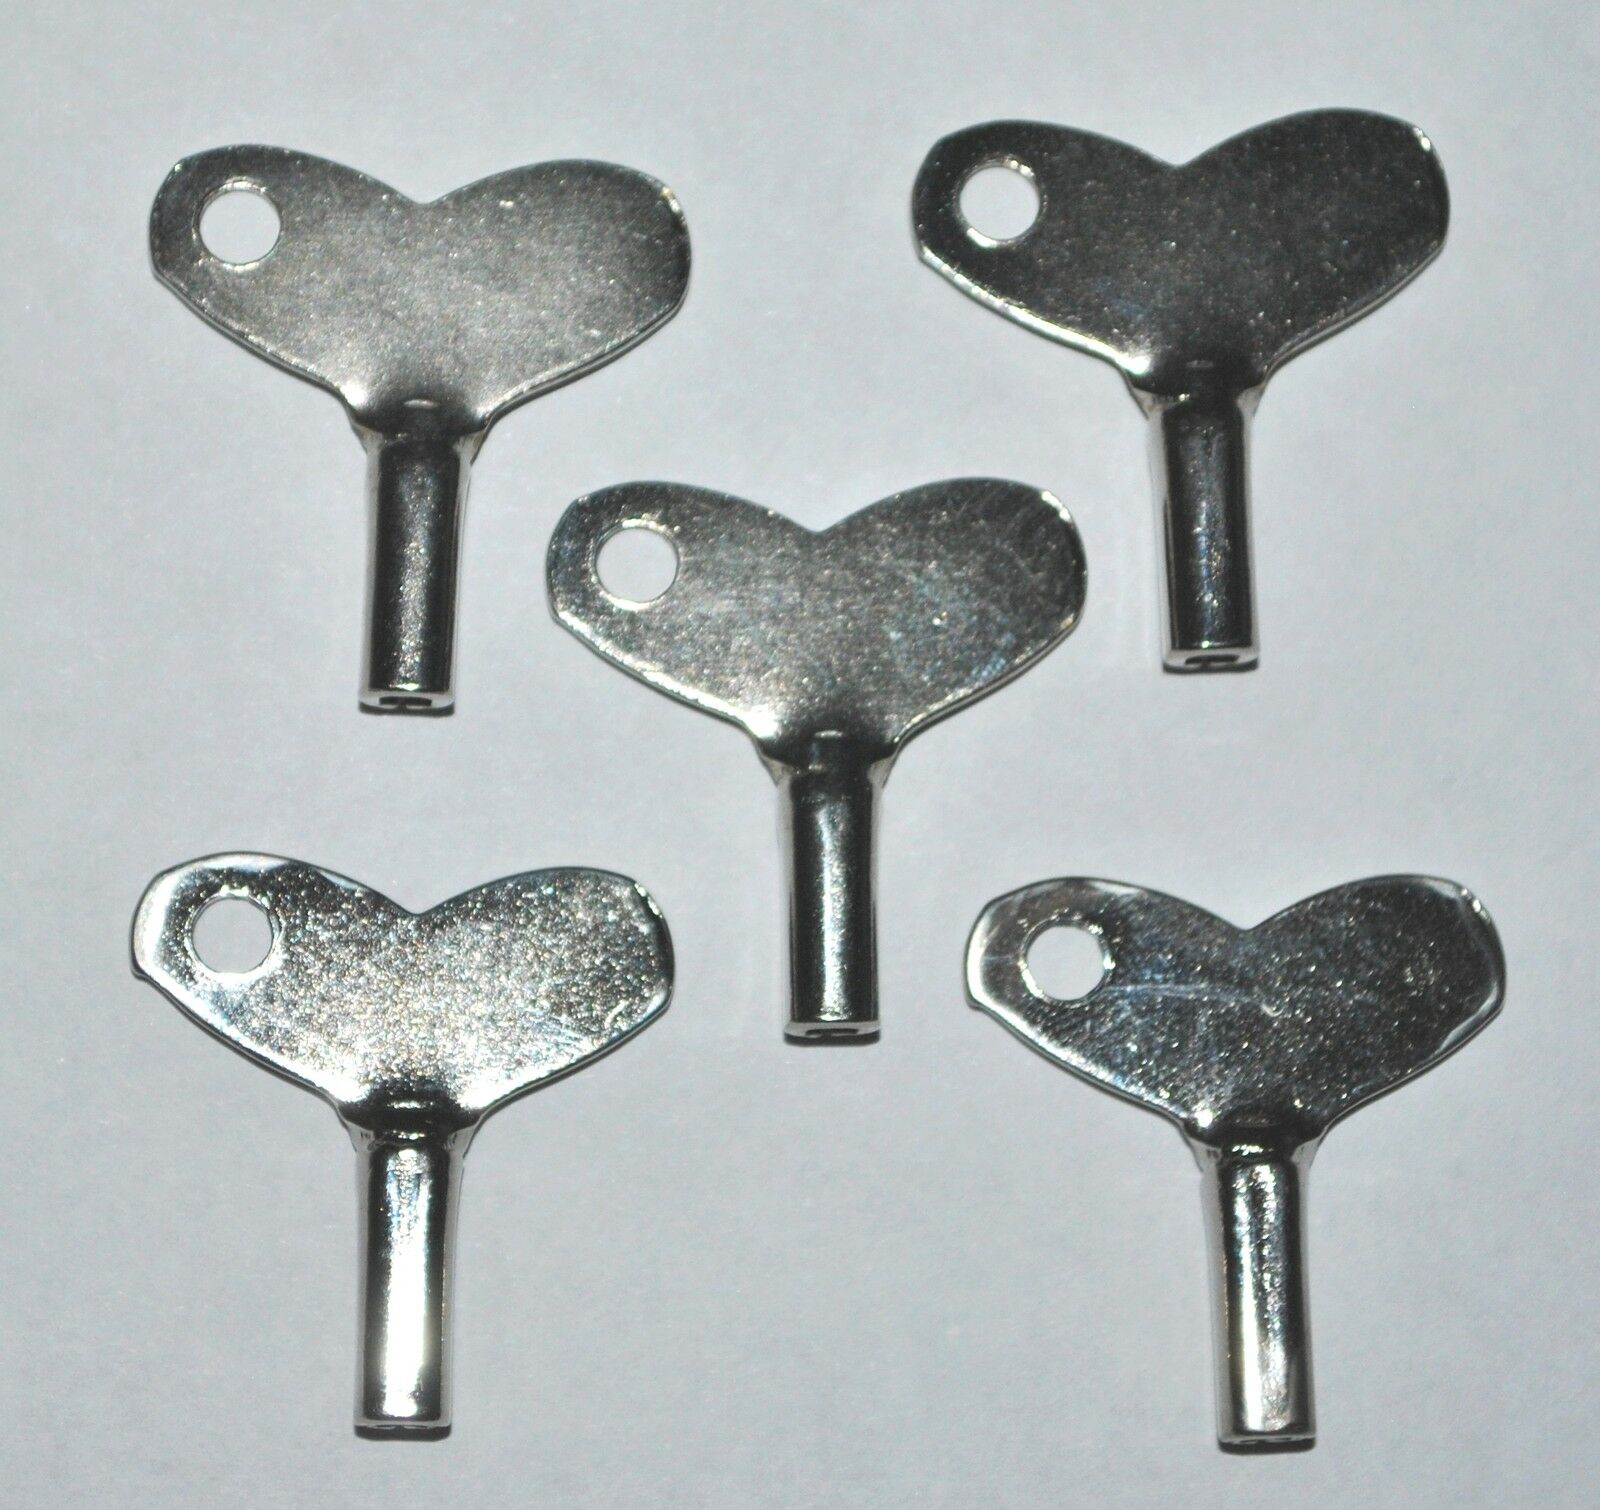 5 - Metal Replacement Wind-up Keys "for Windup Toys" - Free Shipping!! - L@@k!!